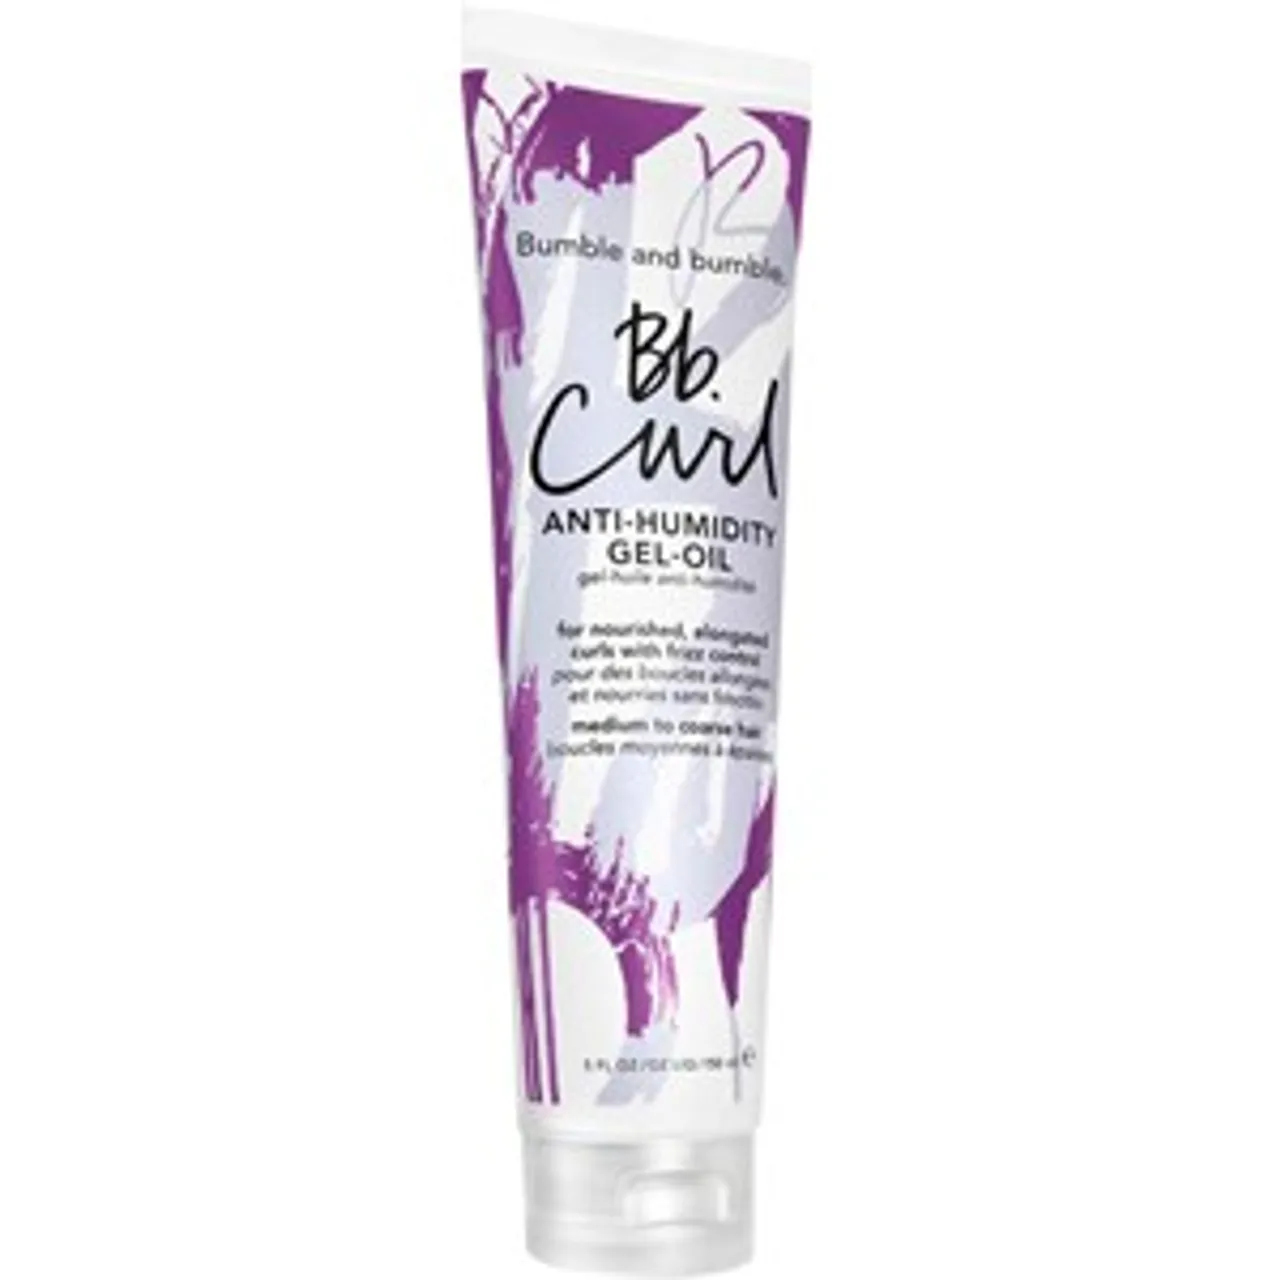 Bumble and bumble Anti-Humidity Gel-Oil Female 150 ml